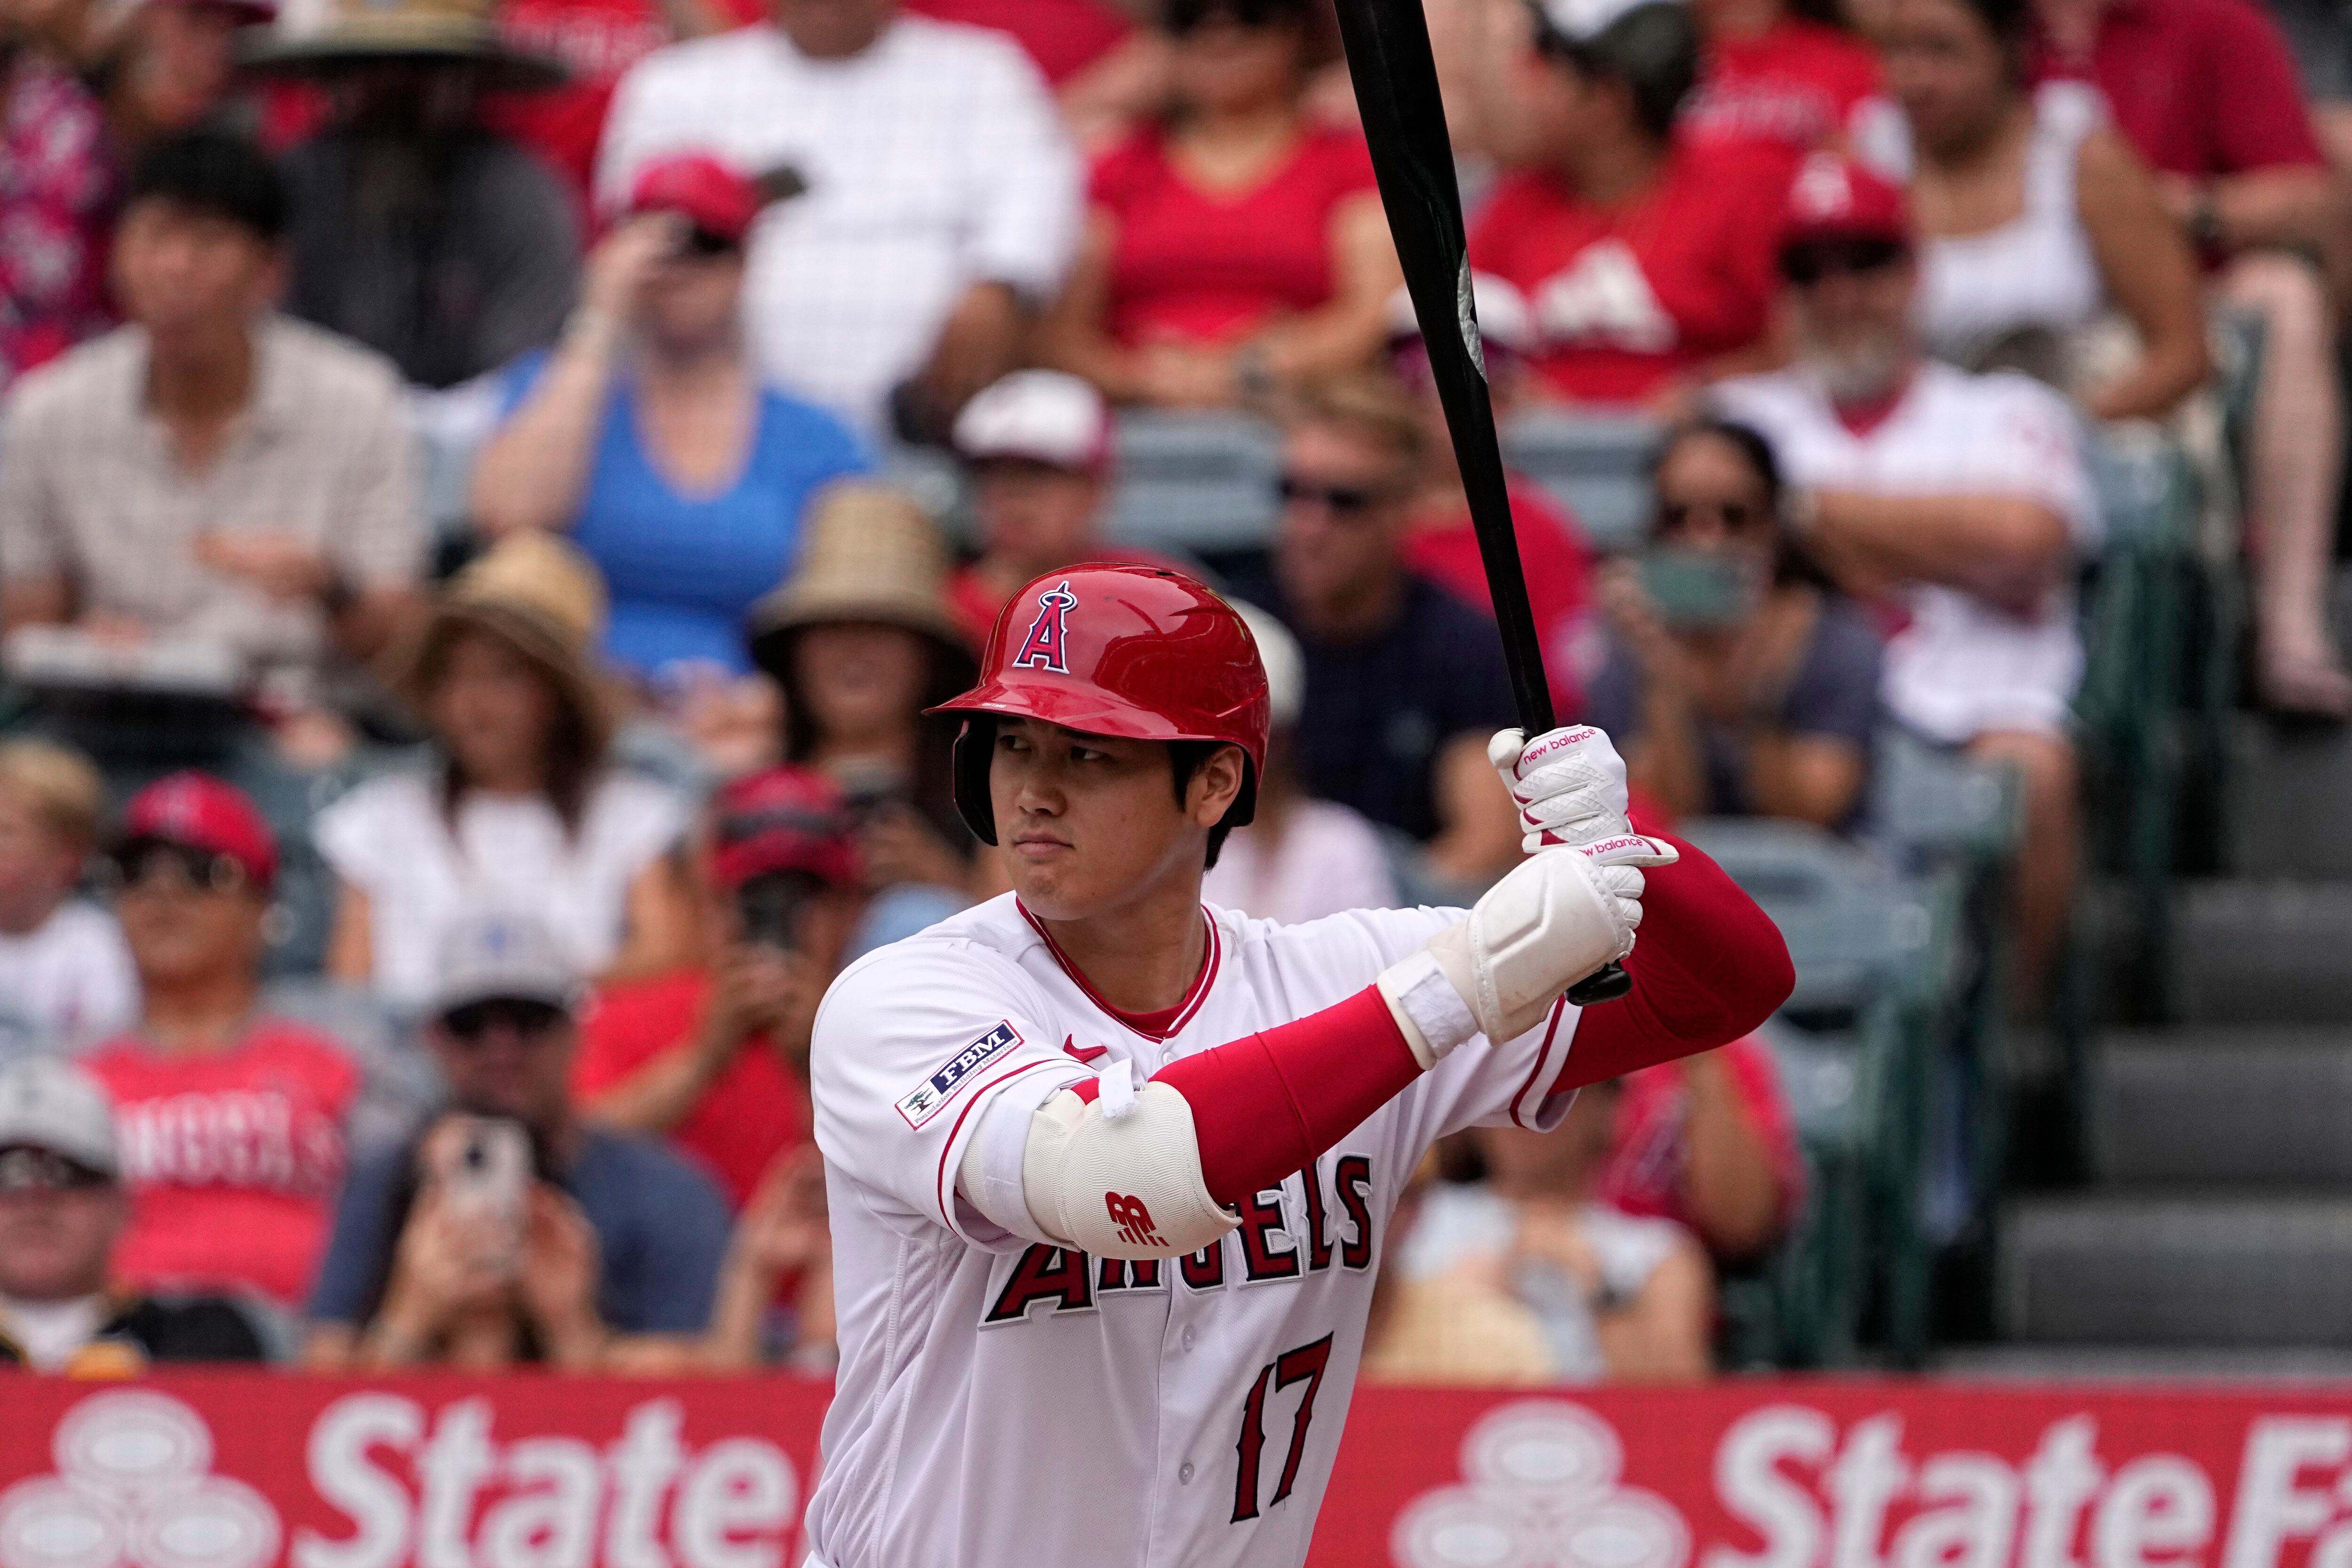 Shohei Ohtani, dealing with a finger blister, says he's unlikely to pitch  at MLB All-Star Game